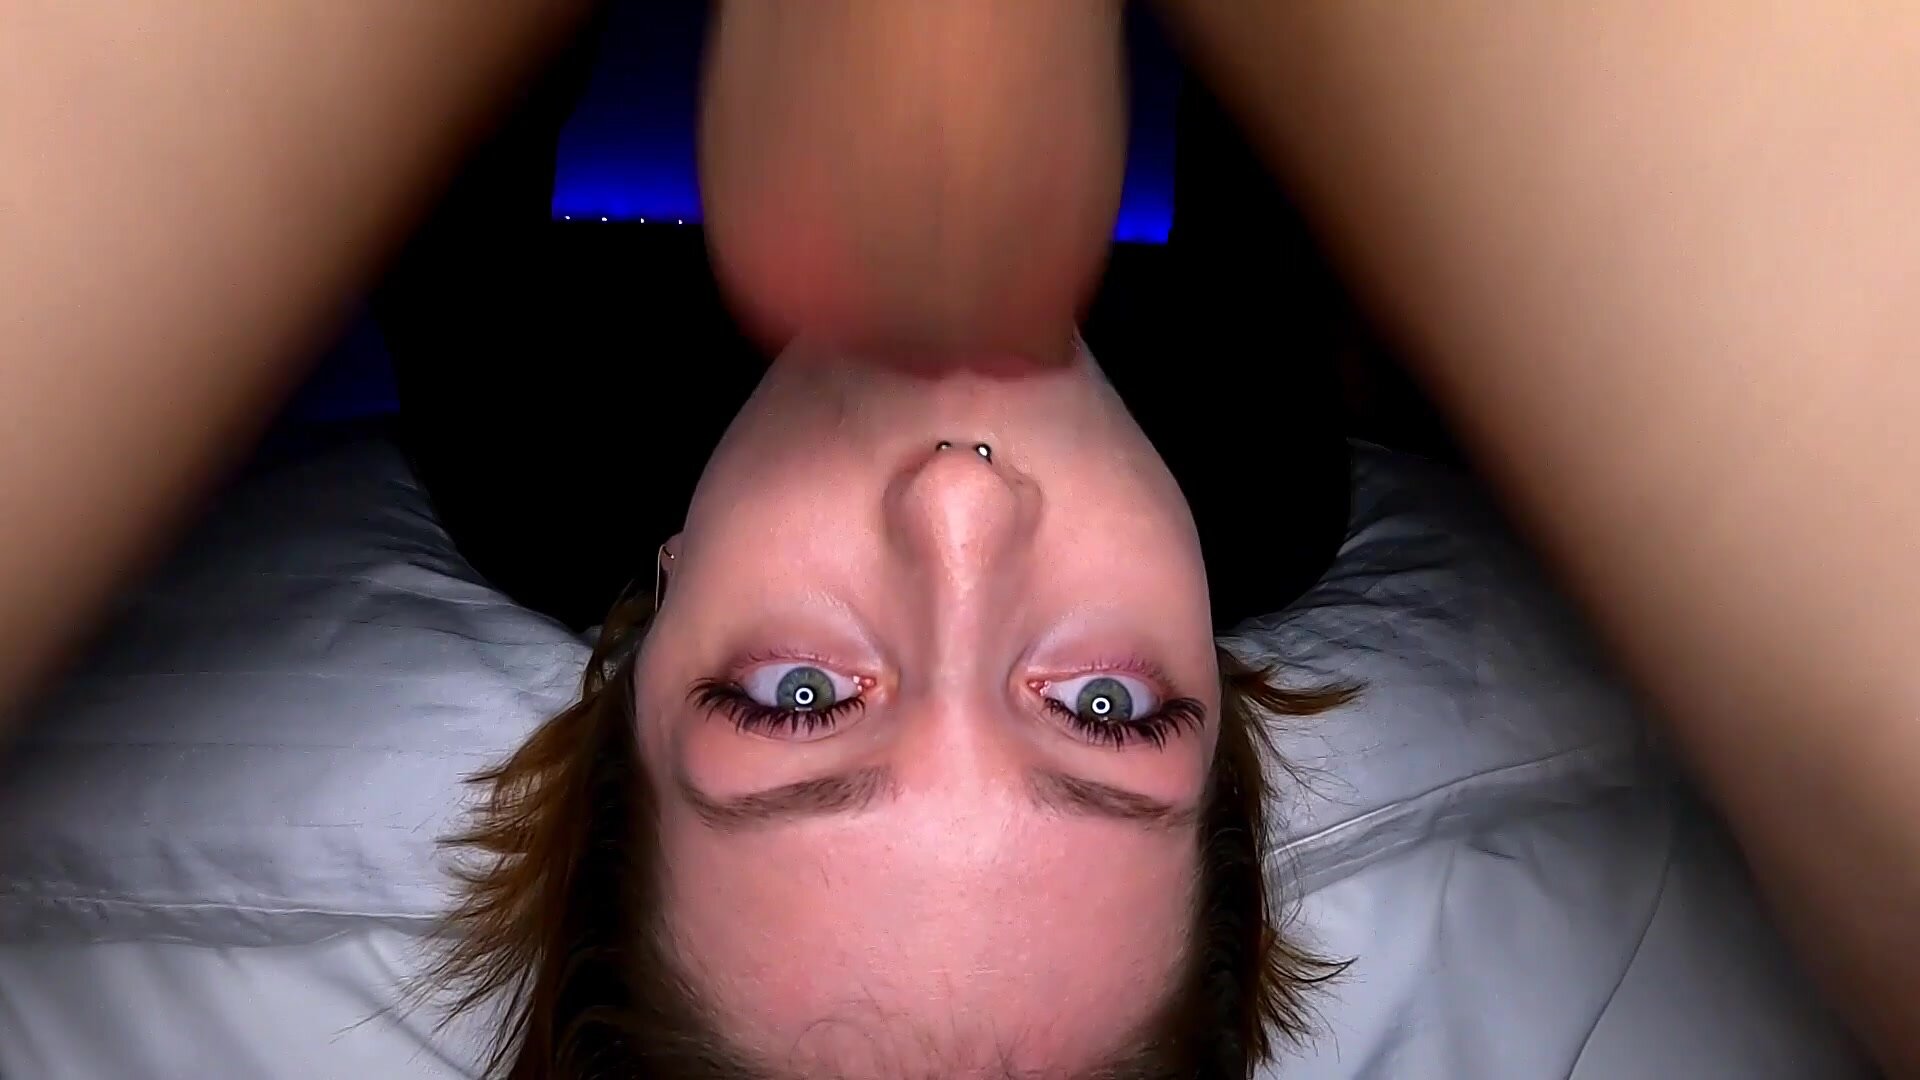 Fuck mouth Upside Down